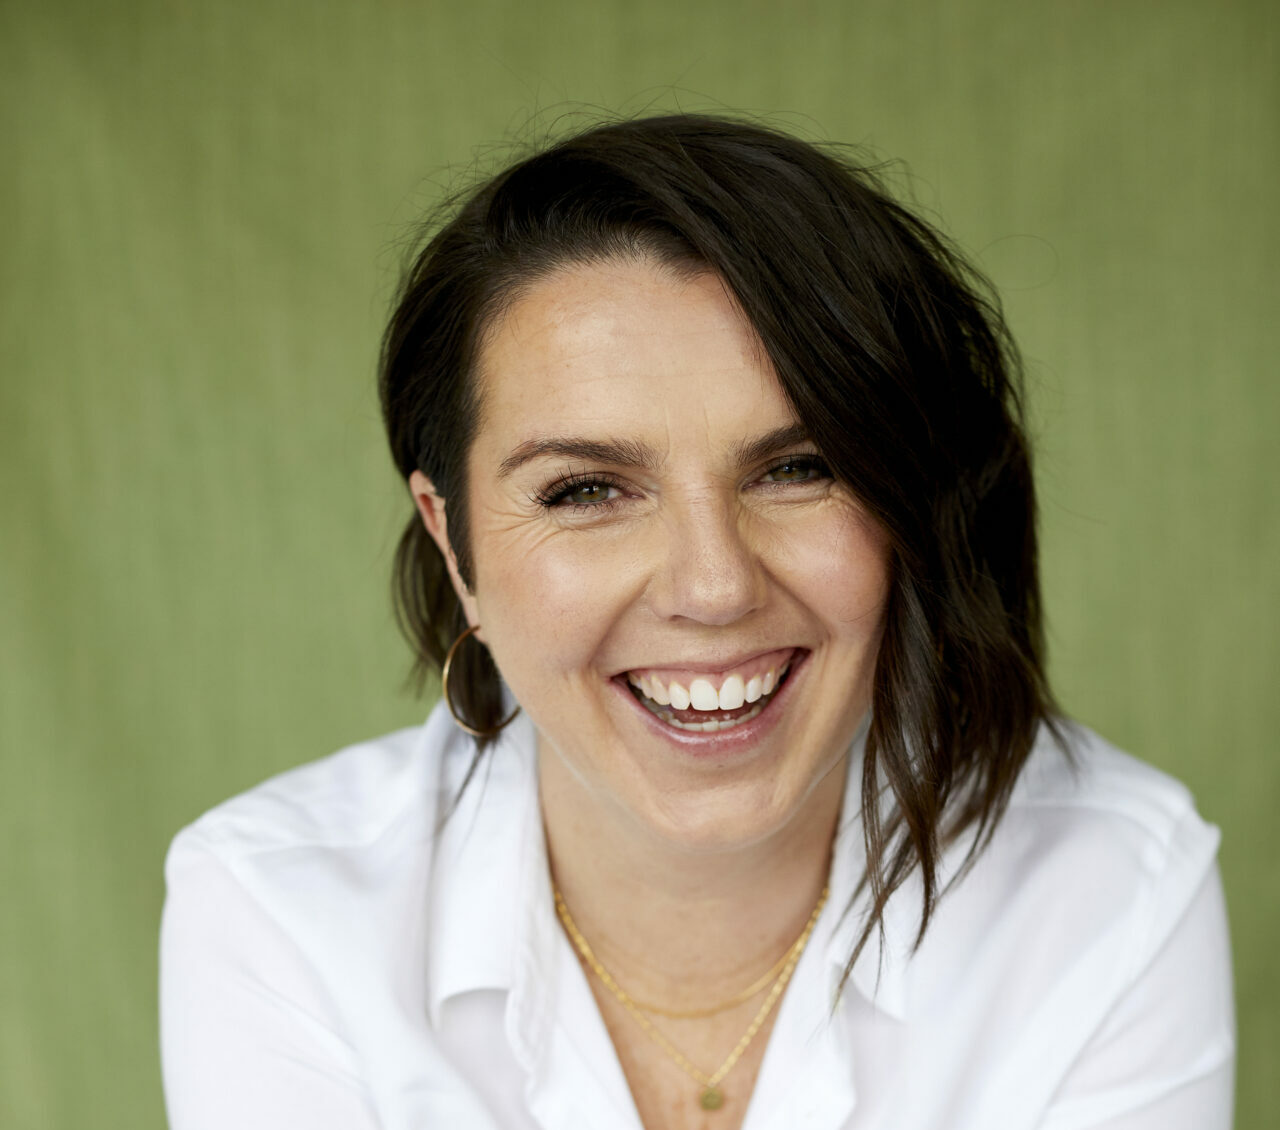 A photograph of a laughing white woman with shoulder length straight dark hair and a white blouse